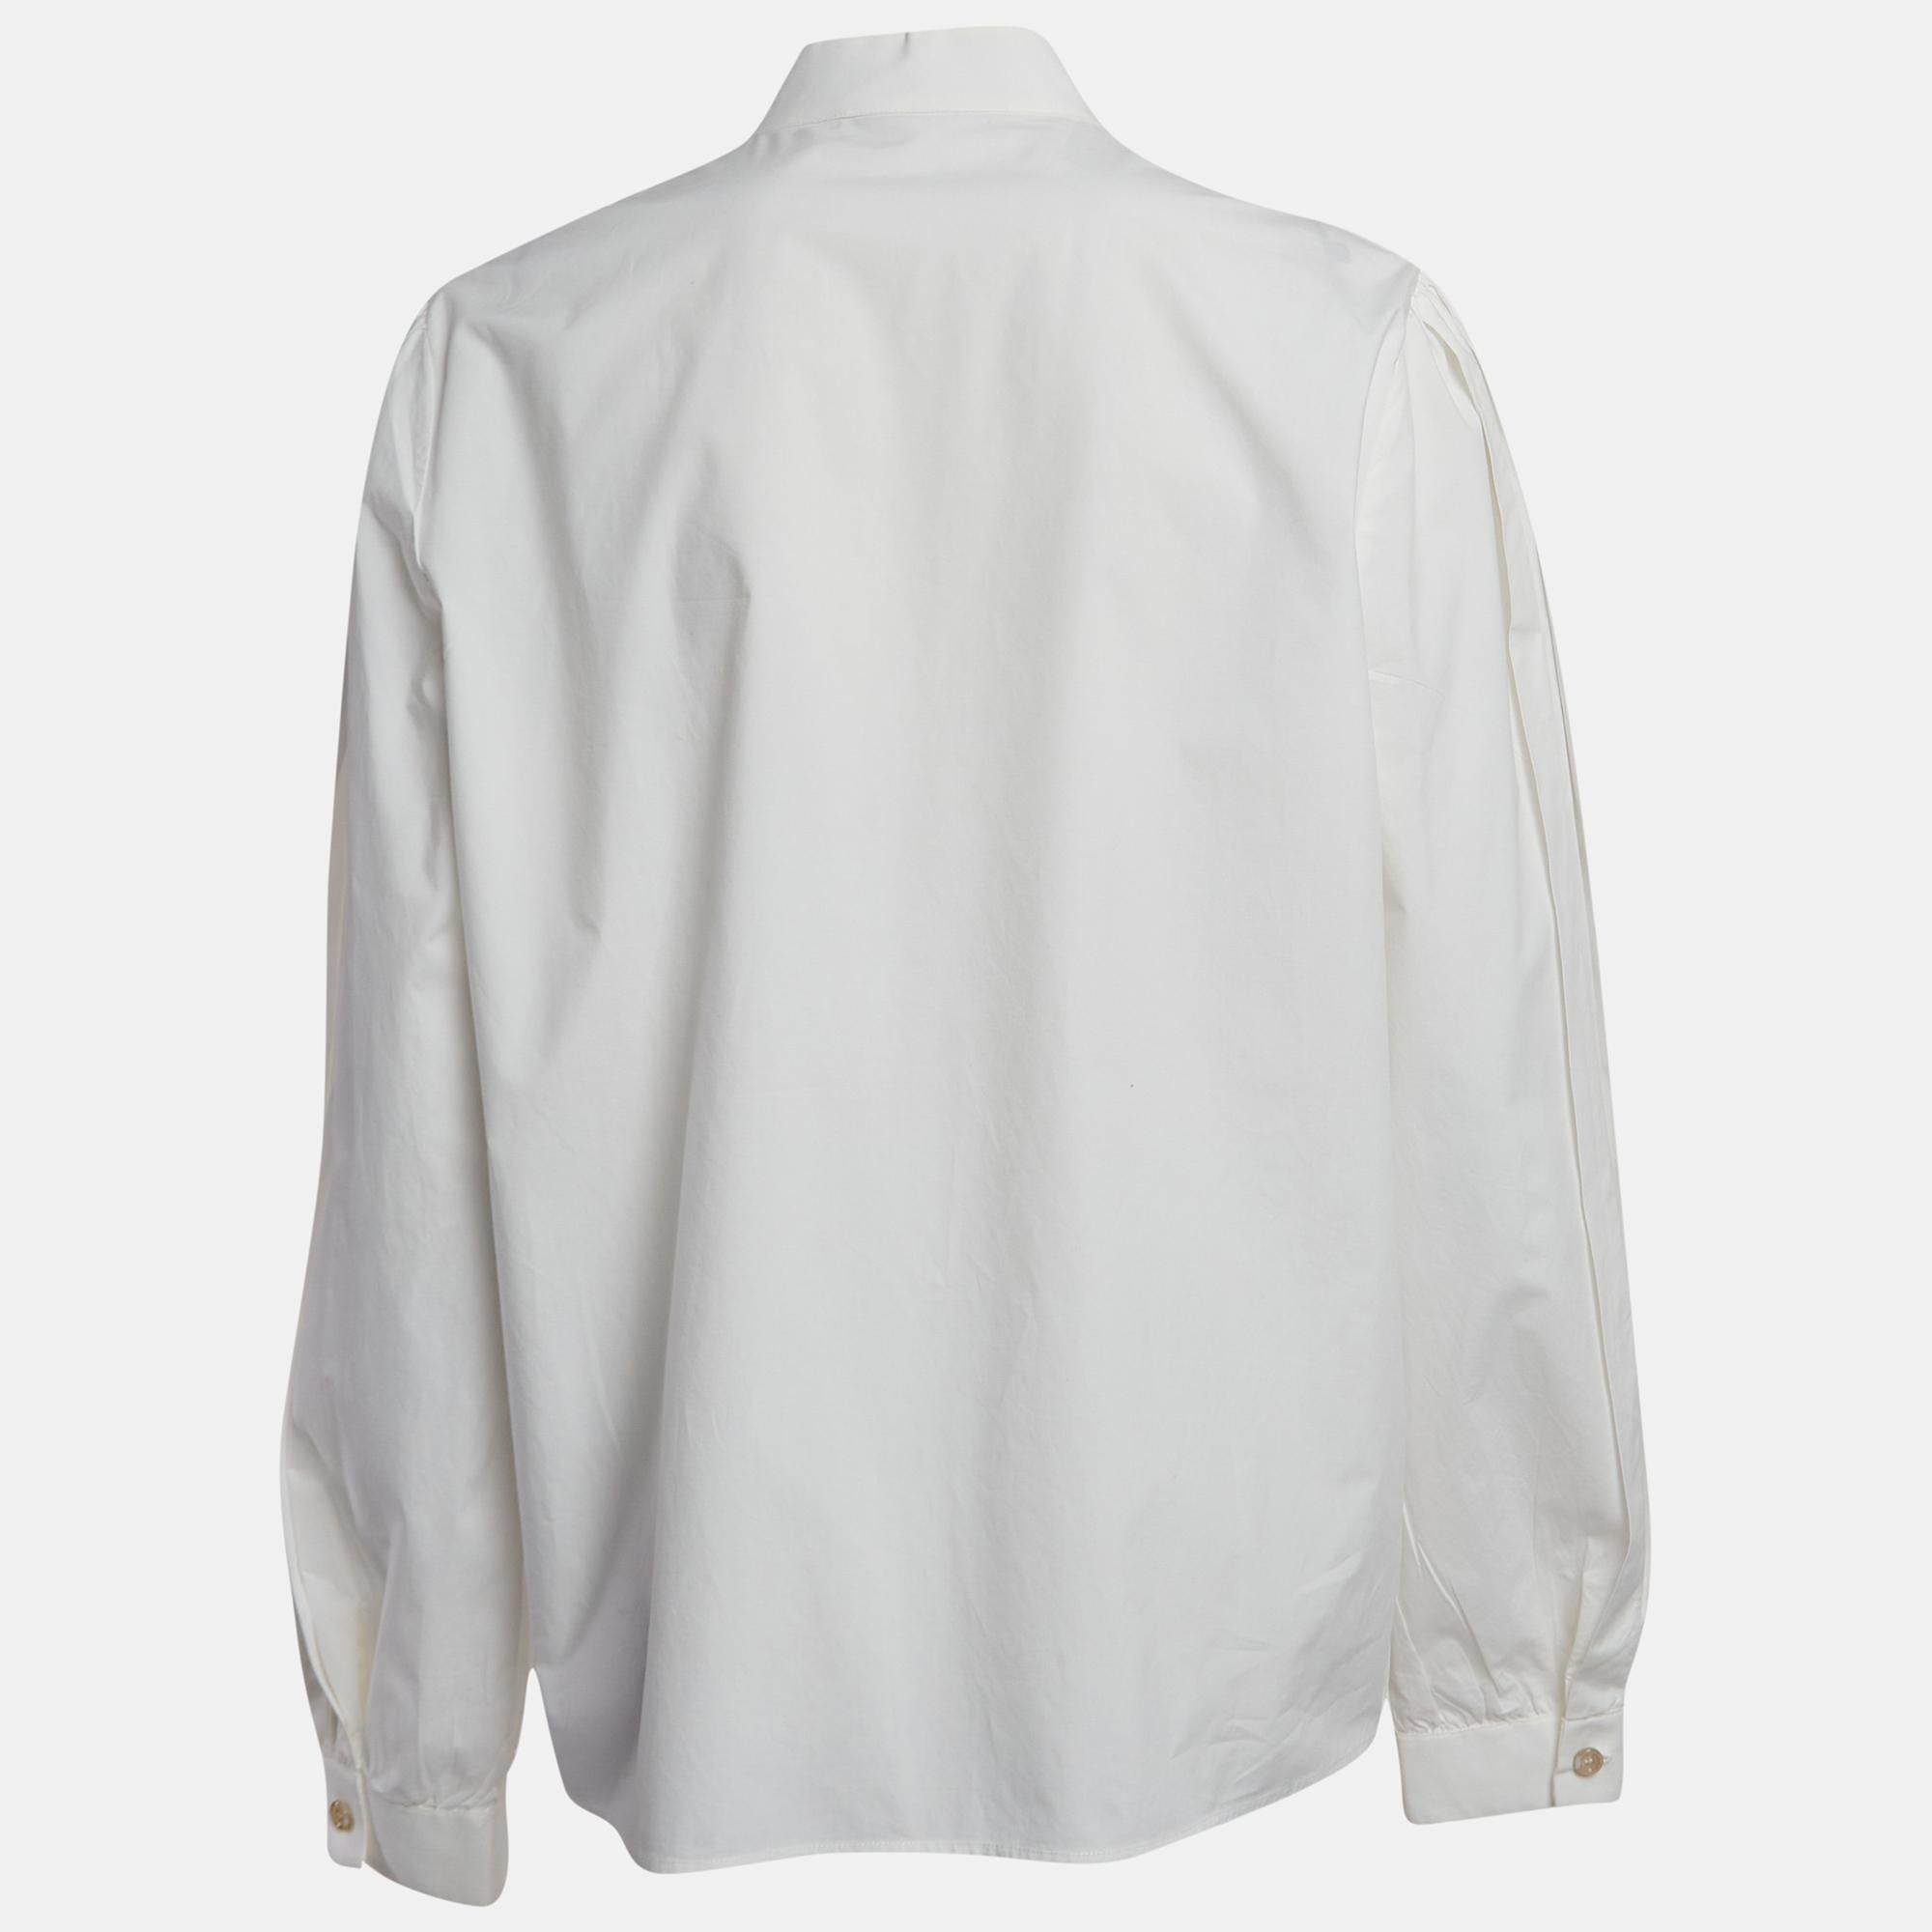 Step into elegance with the Gucci shirt. Crafted with precision and finesse, this garment exudes sophistication. Its crisp white hue and fly front design elevate any ensemble, while the soft cotton fabric ensures comfort and breathability throughout